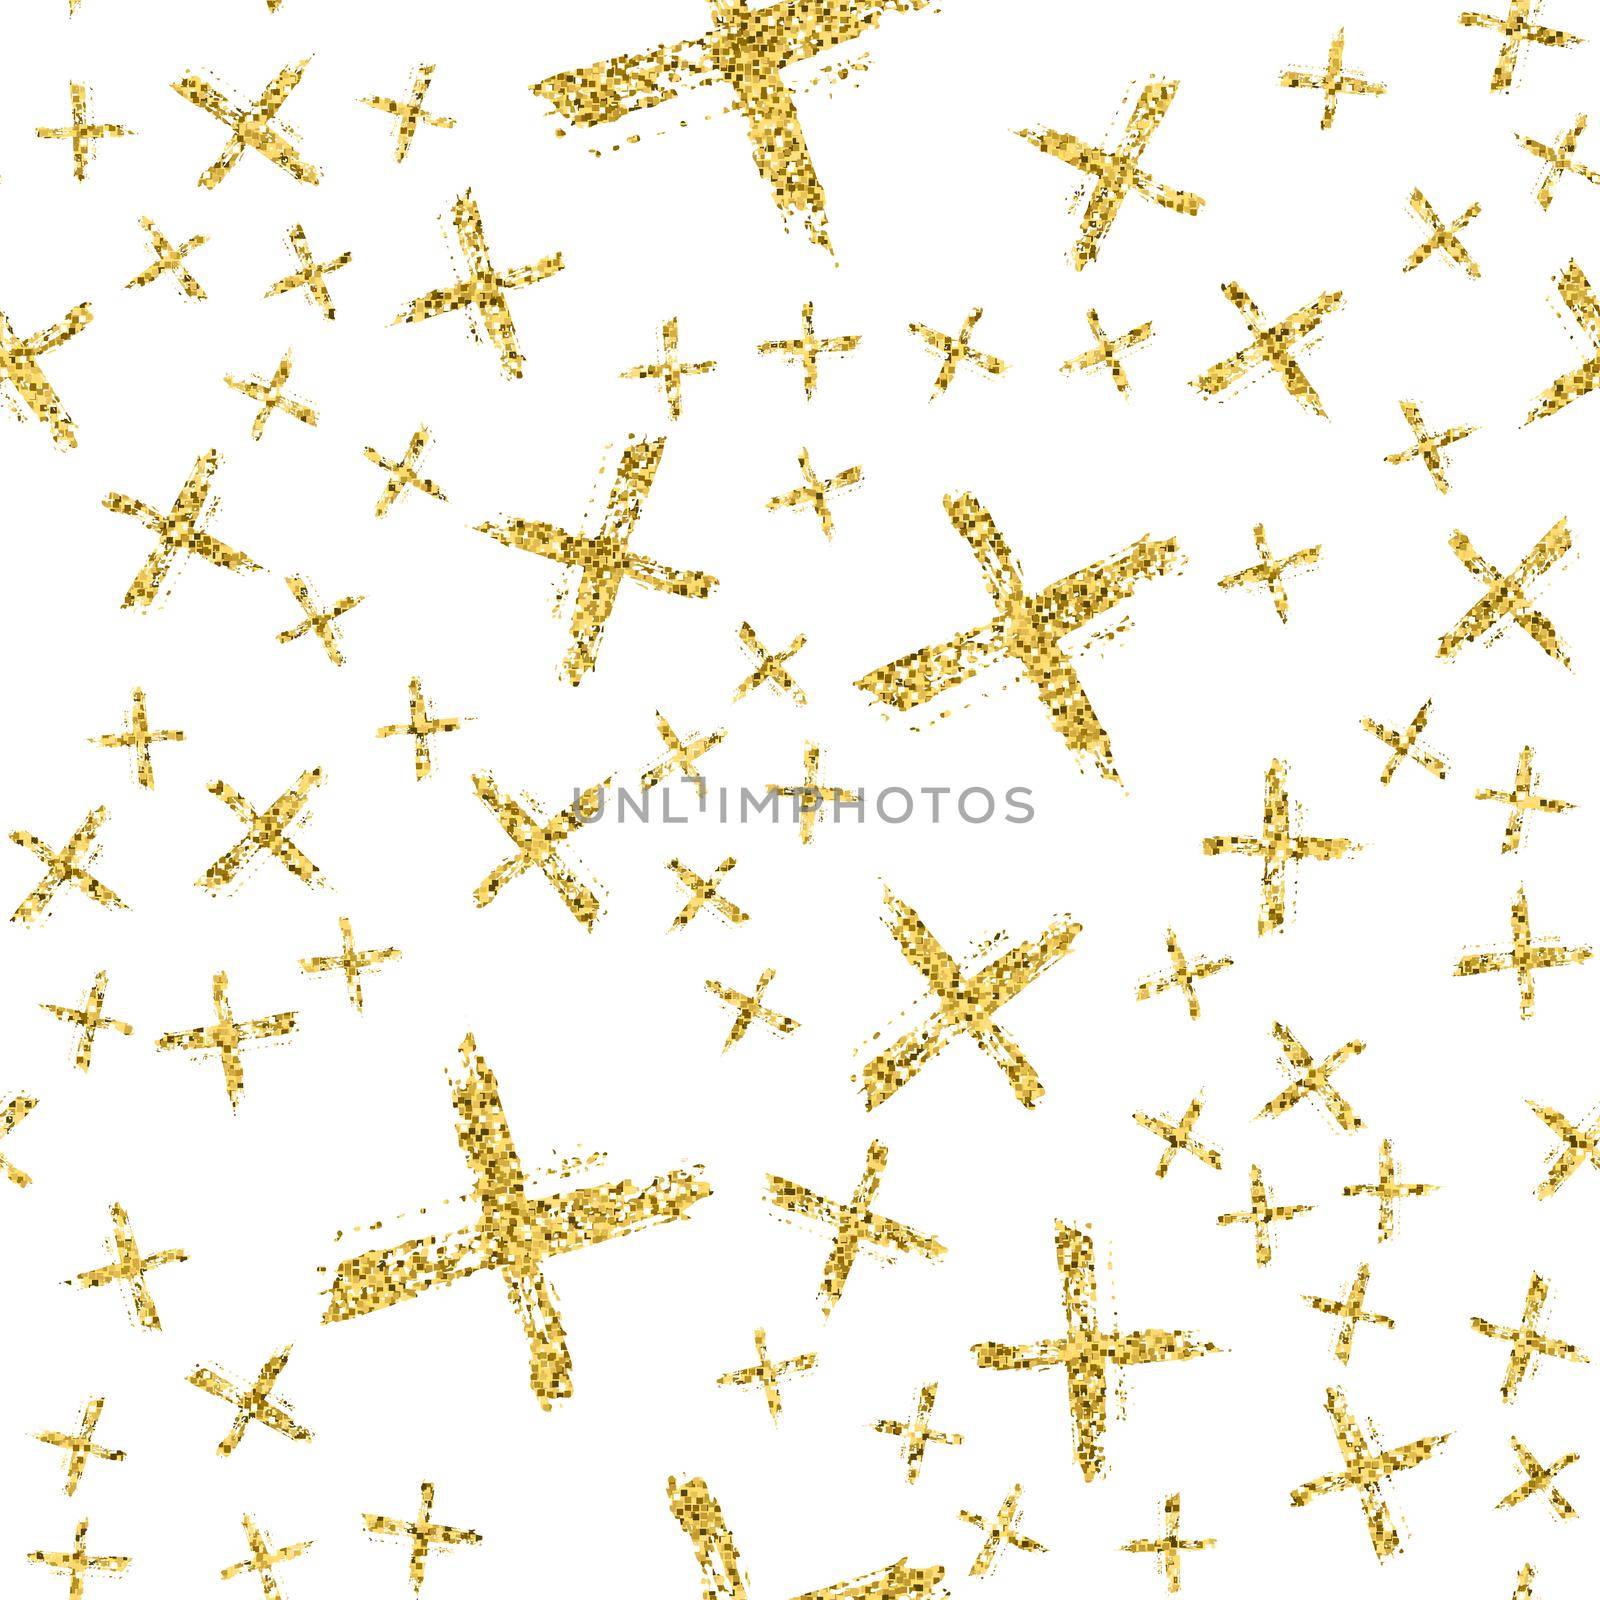 Modern seamless pattern with brush shiny cross. Gold metallic color on white background. Golden glitter texture. Ink geometric elements. Fashion catwalk style. Repeat fabric cloth print, textile.